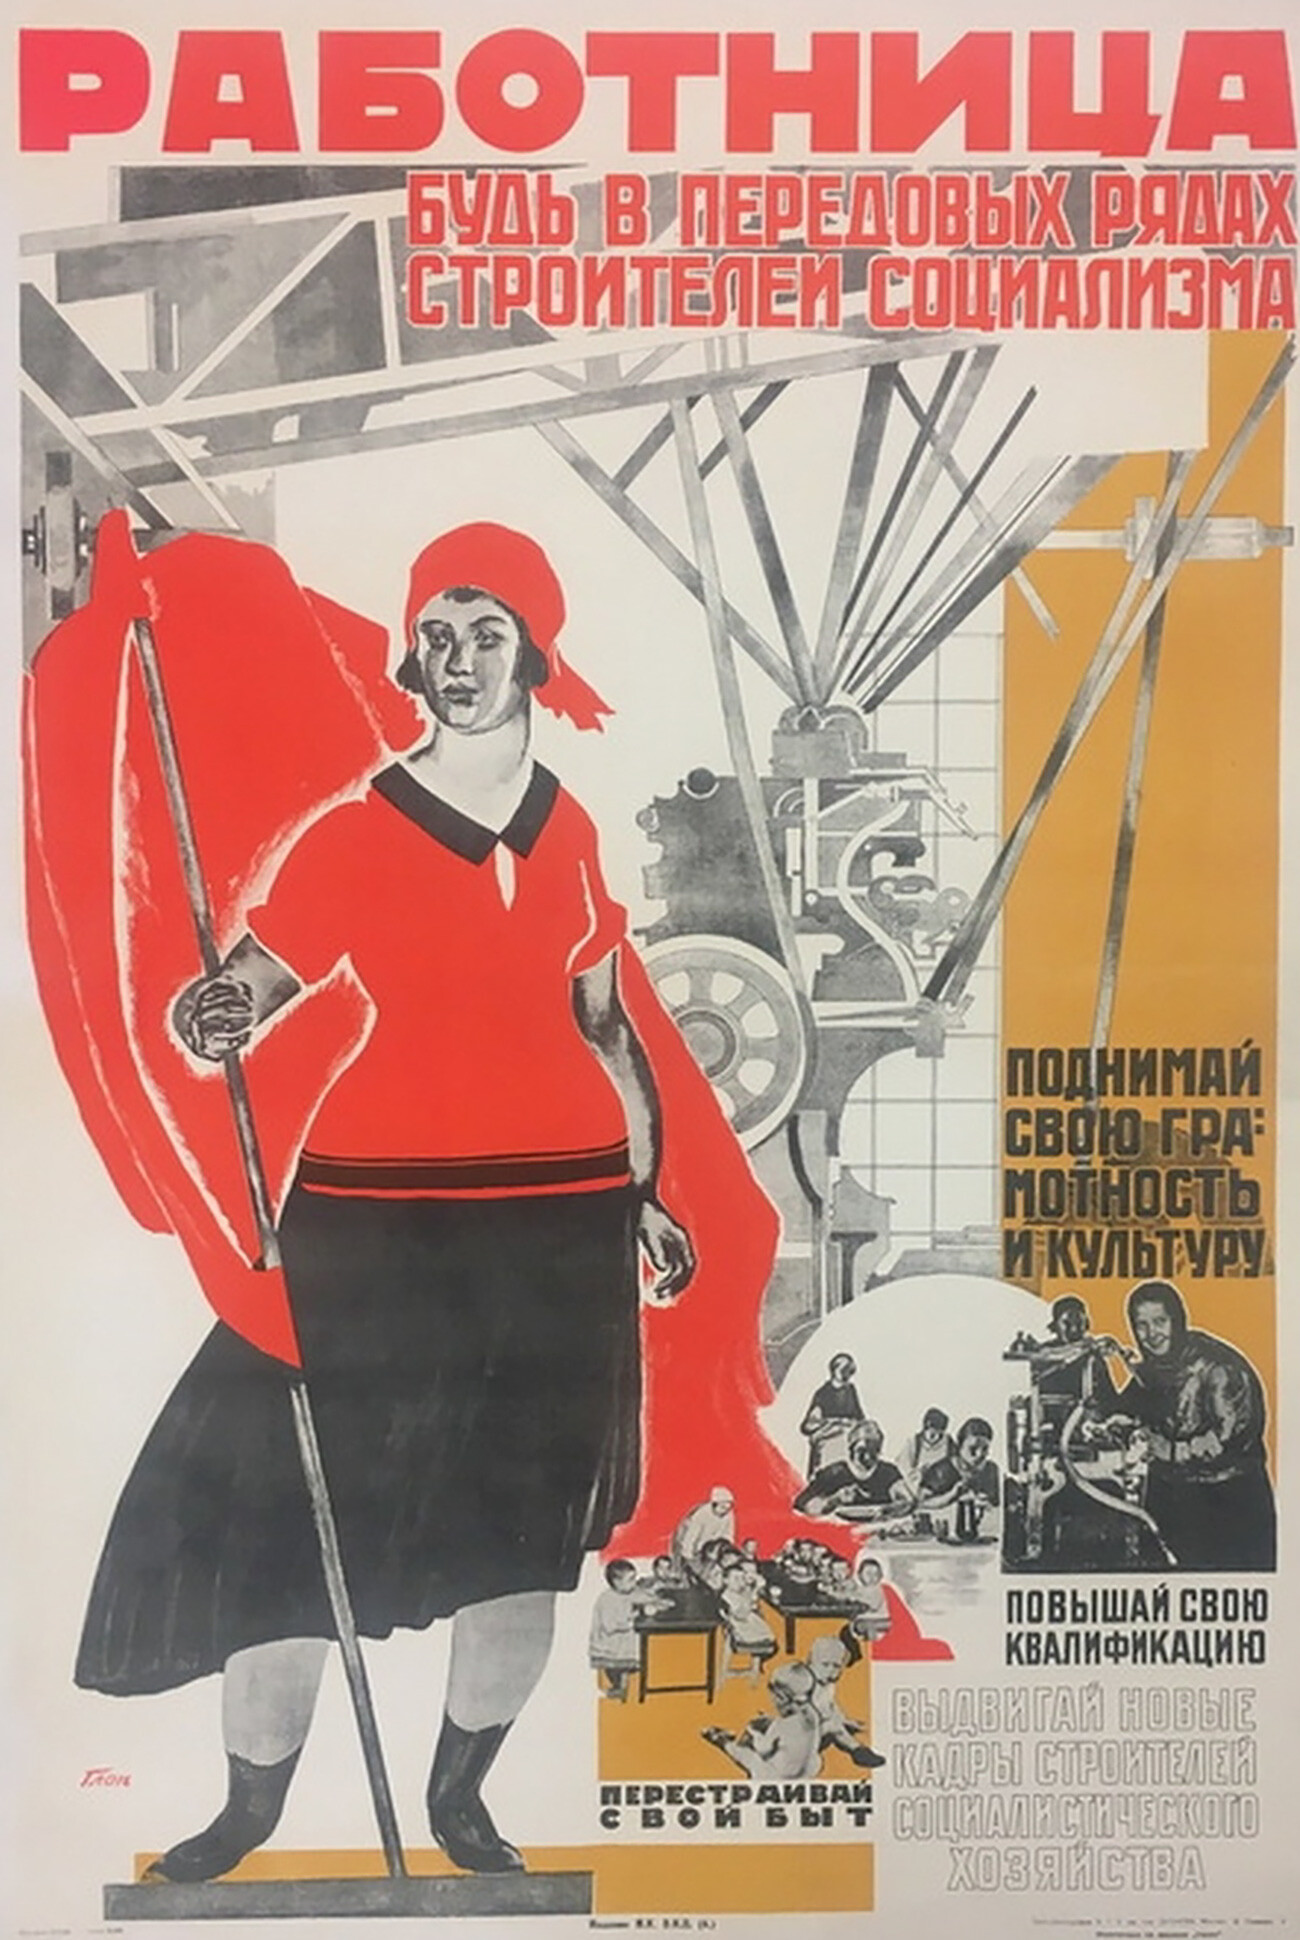 “Female worker, be in the first rows of the builders of socialism, raise your literacy and culture, enhance your qualification”